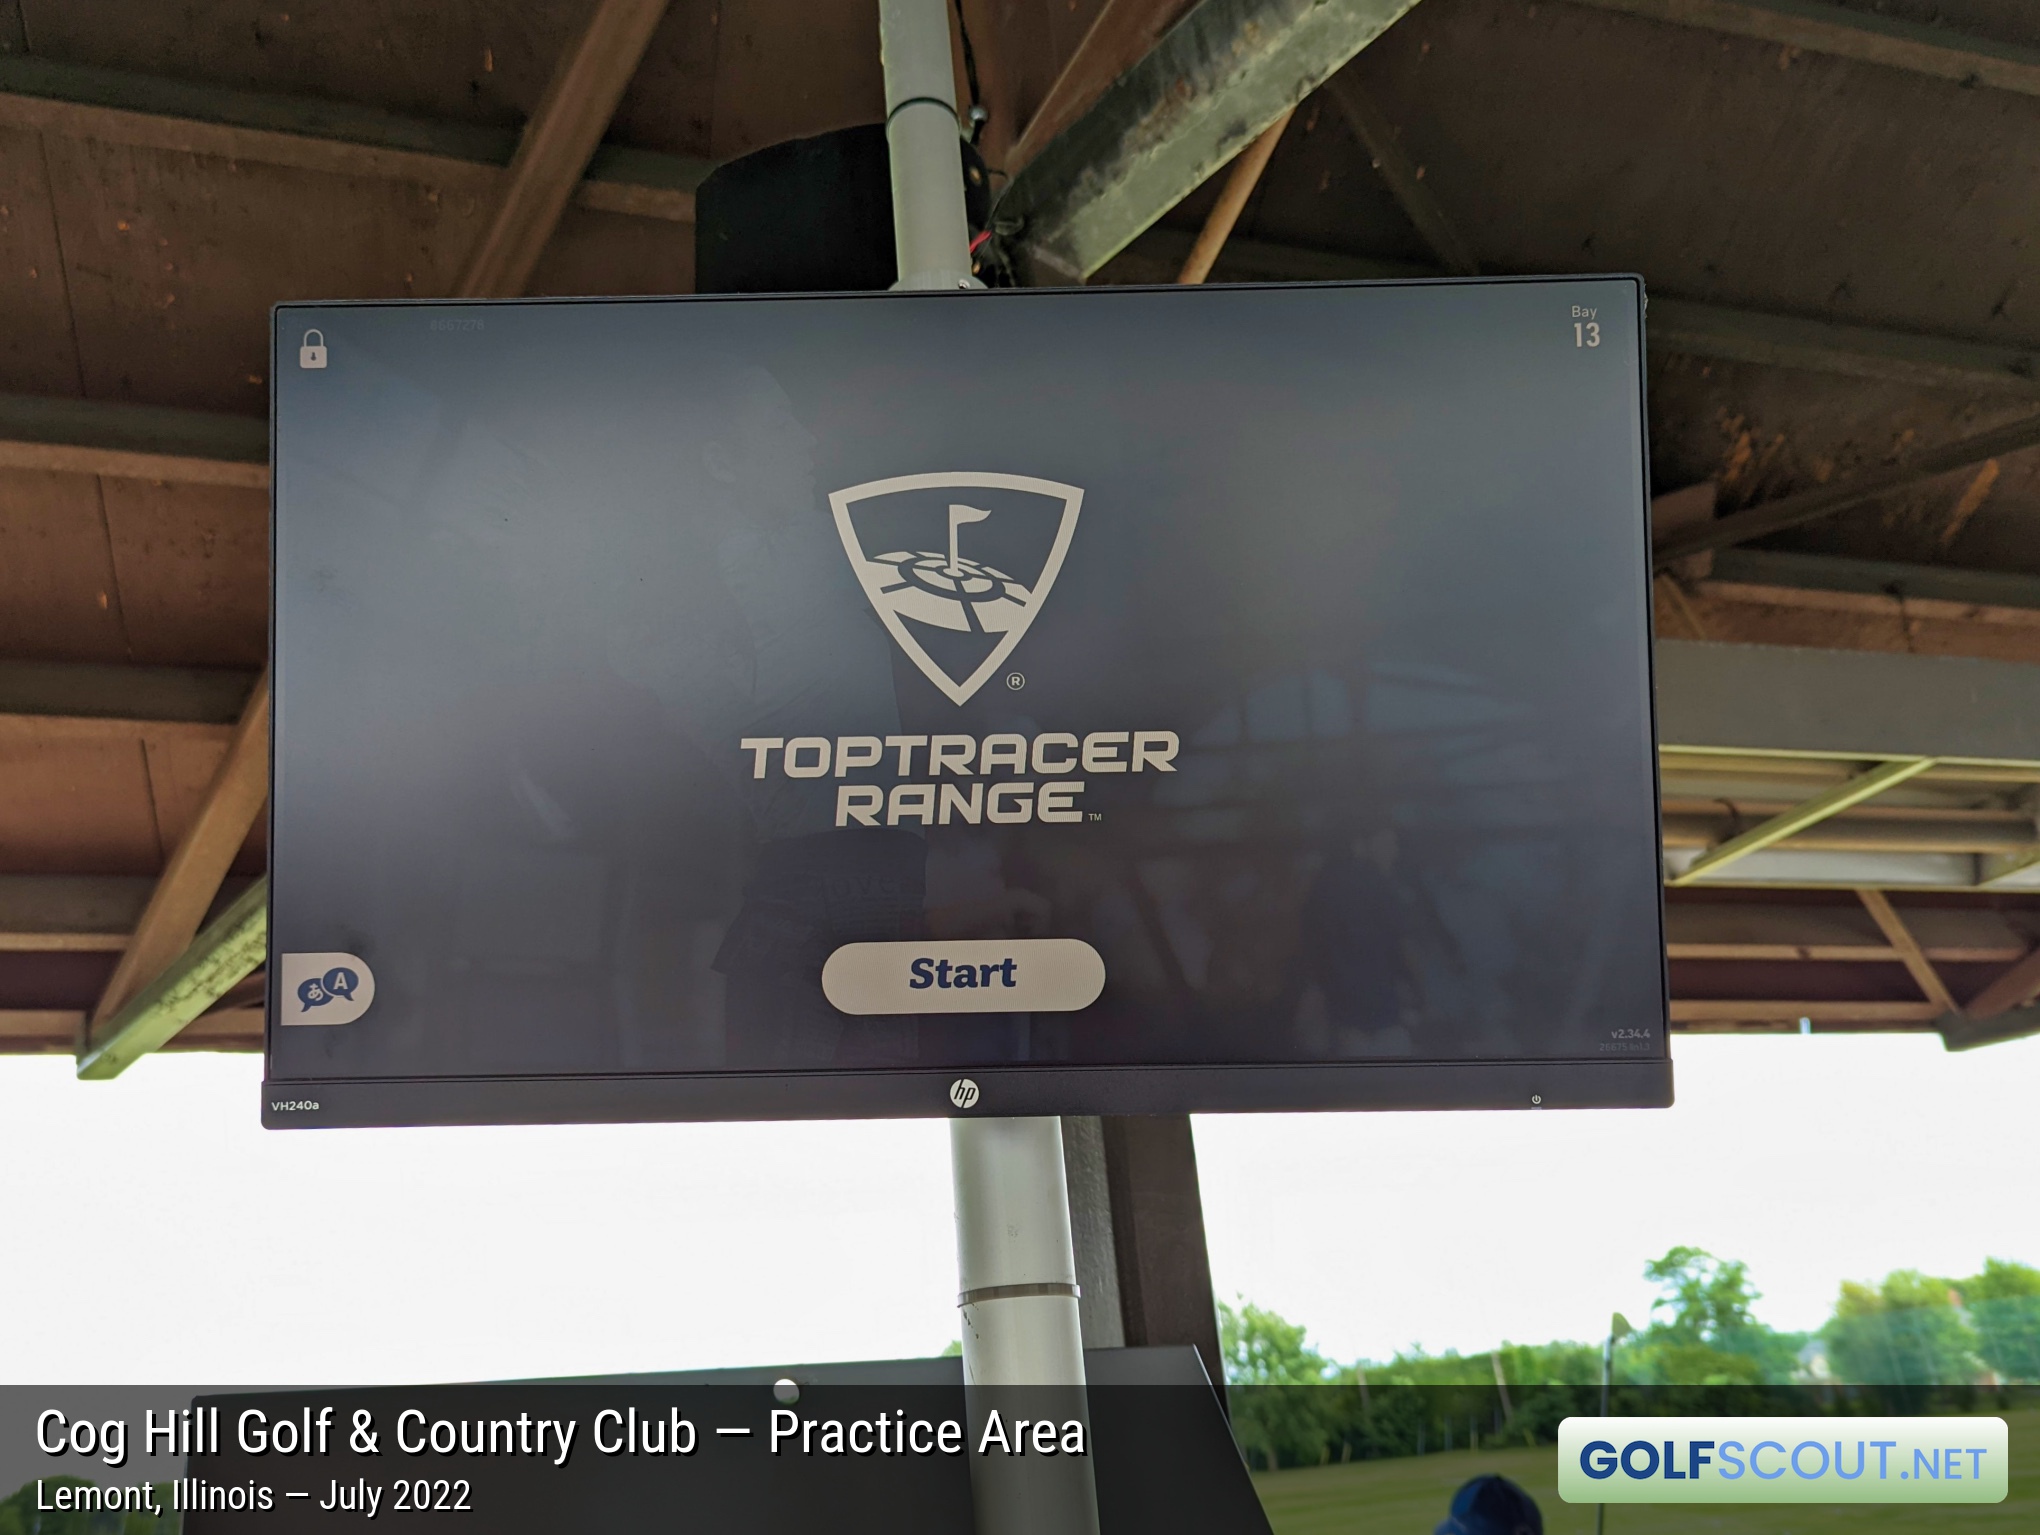 Photo of the practice area at Cog Hill Course #4 - Dubsdread in Lemont, Illinois. The driving range has a tracking system called TopTracer, which analyzes your ball flight, just like the pros.